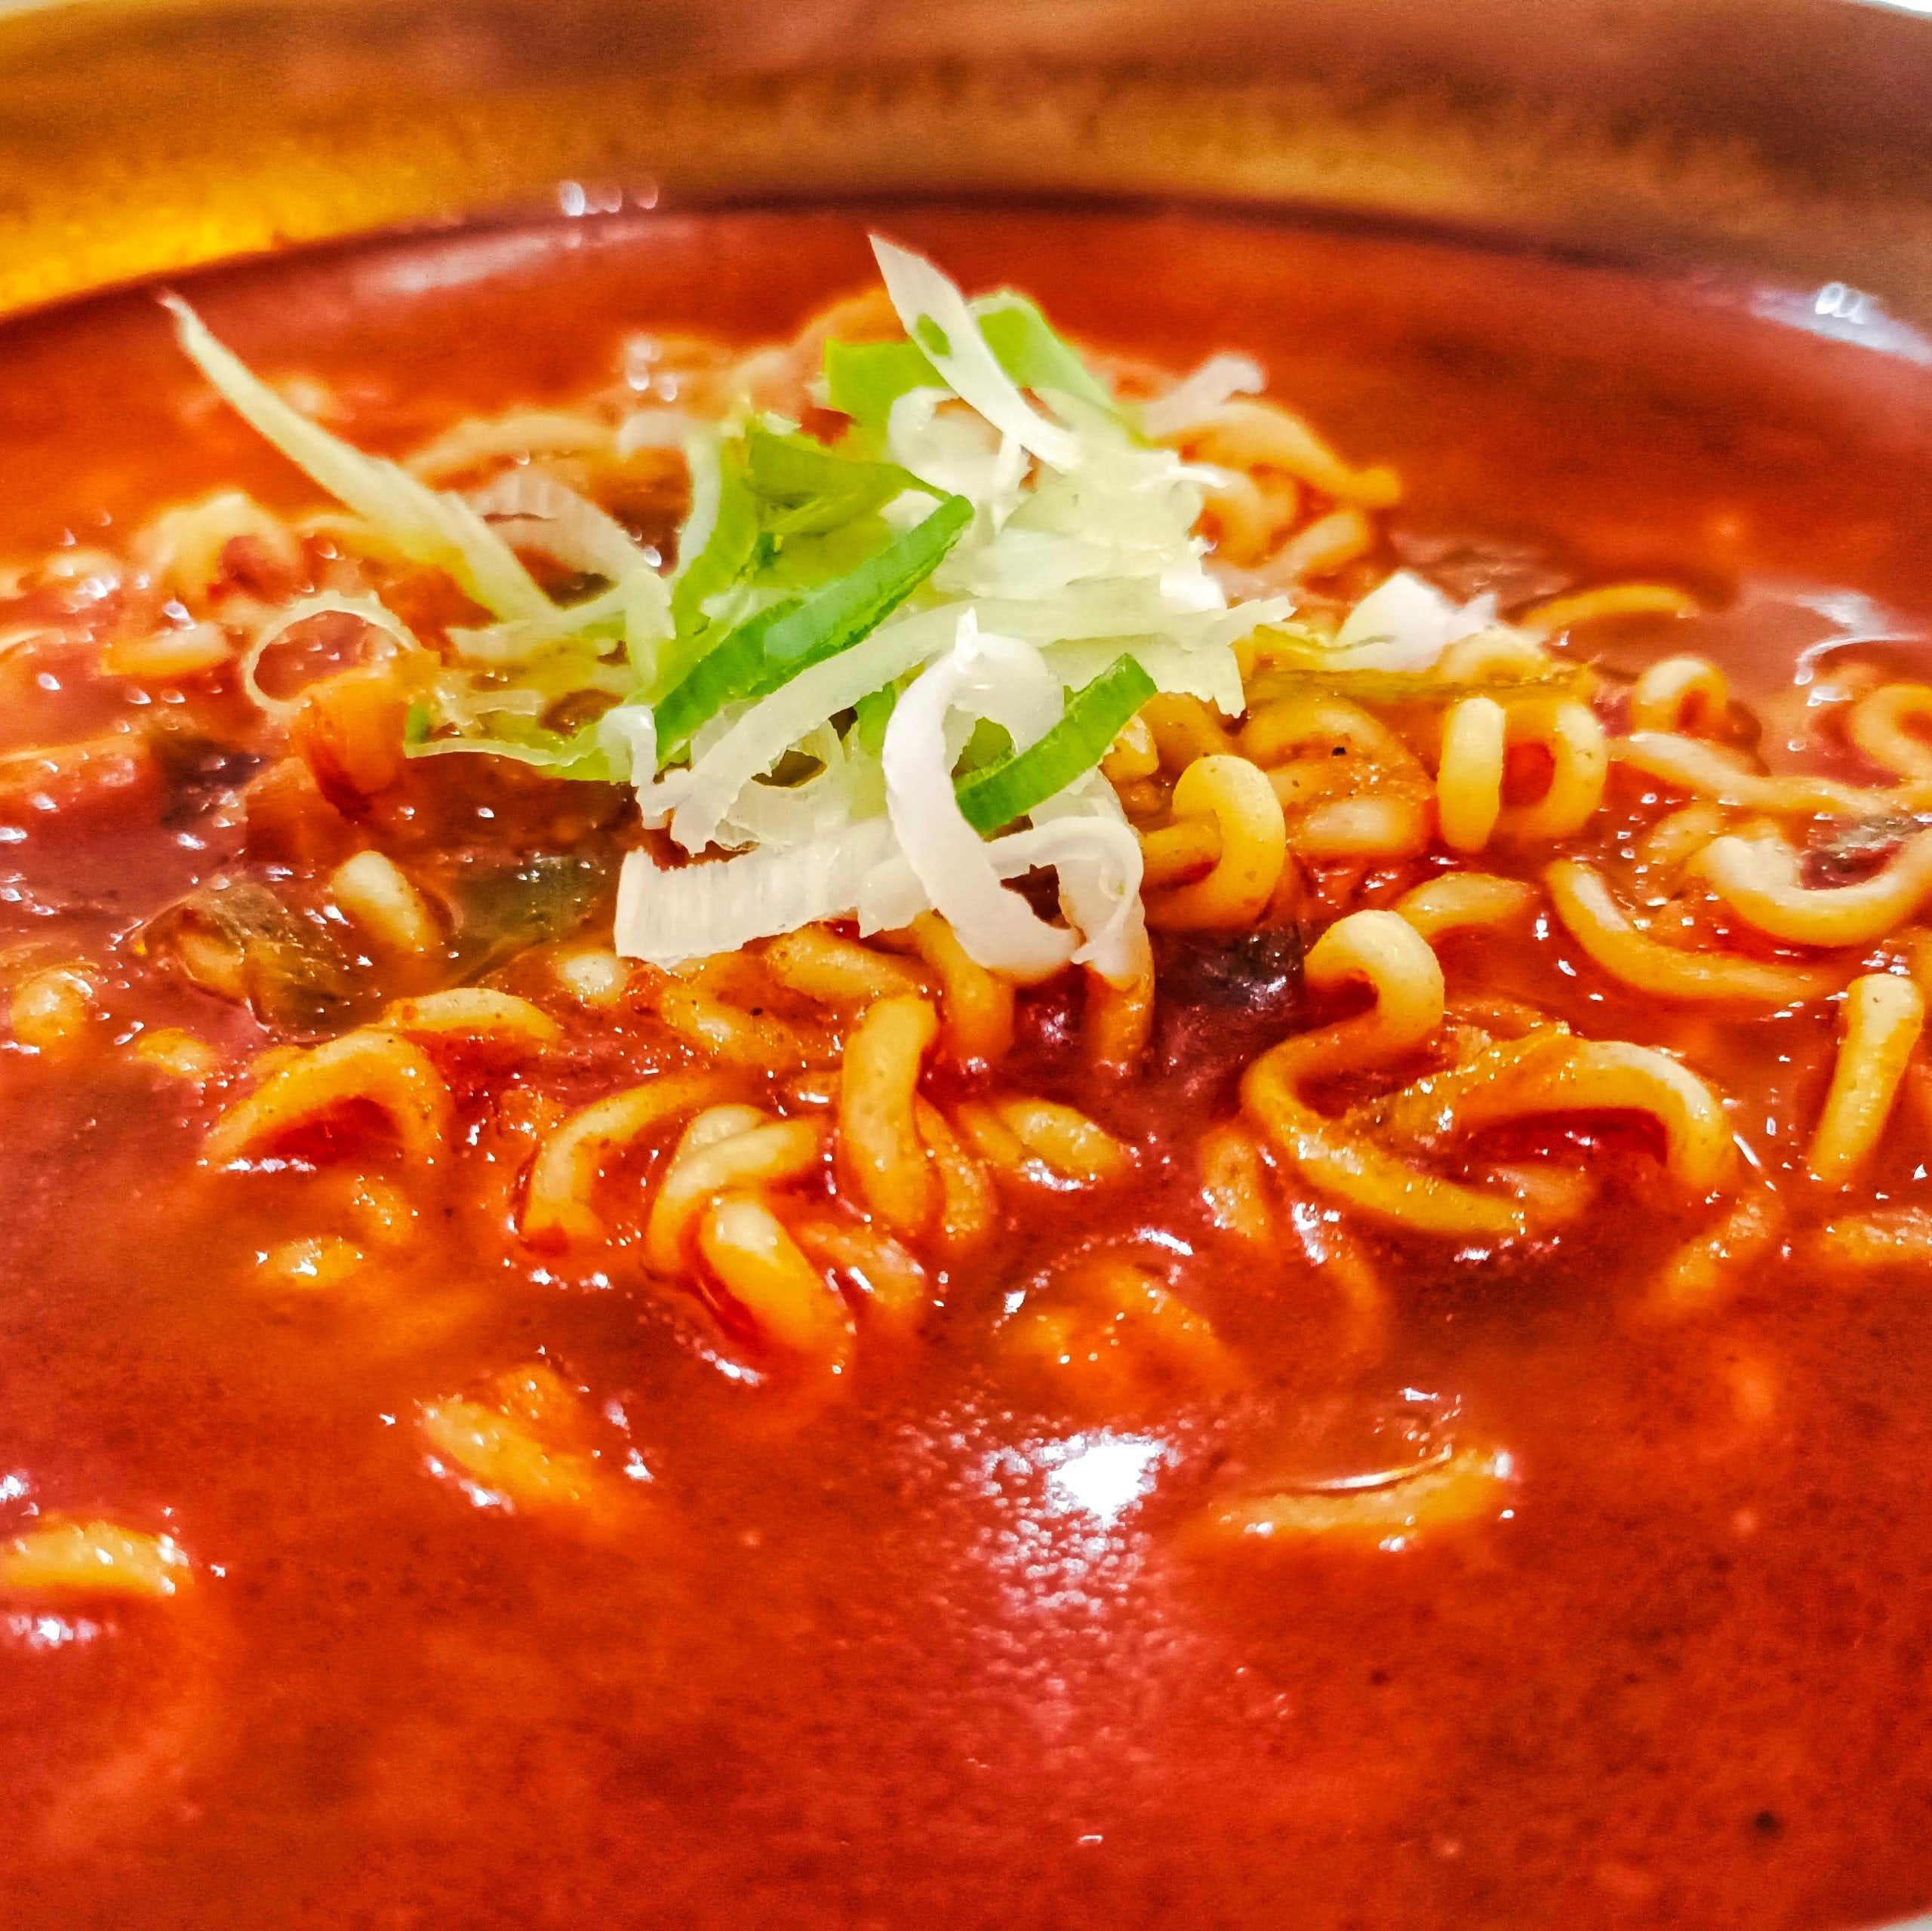 Close-up of a red coloured spicy ramen noodle from Korea.